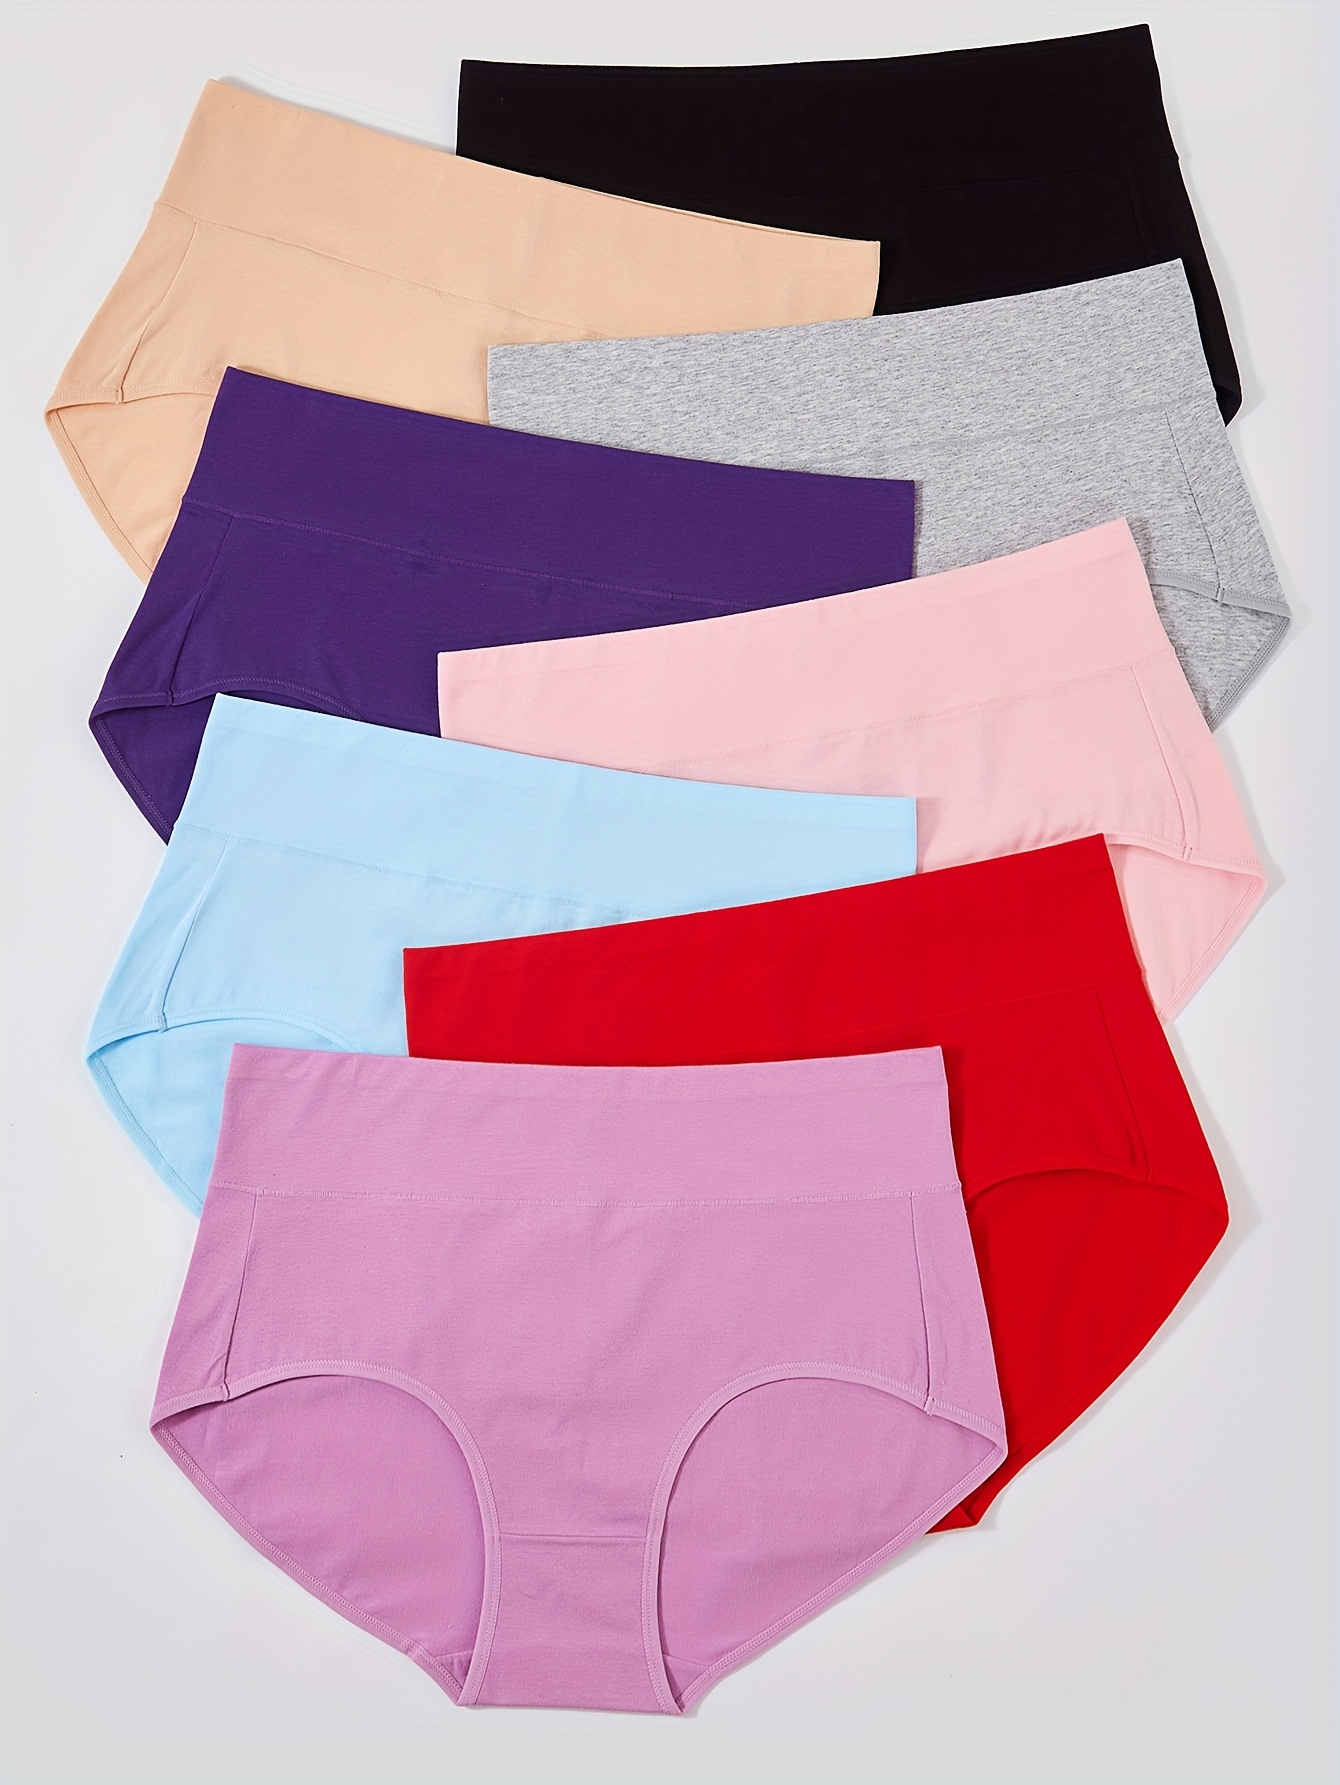 8 Pack Women's High Waisted Cotton Underwear Soft Breathable Panties  Stretch Briefs Regular & Plus Size 